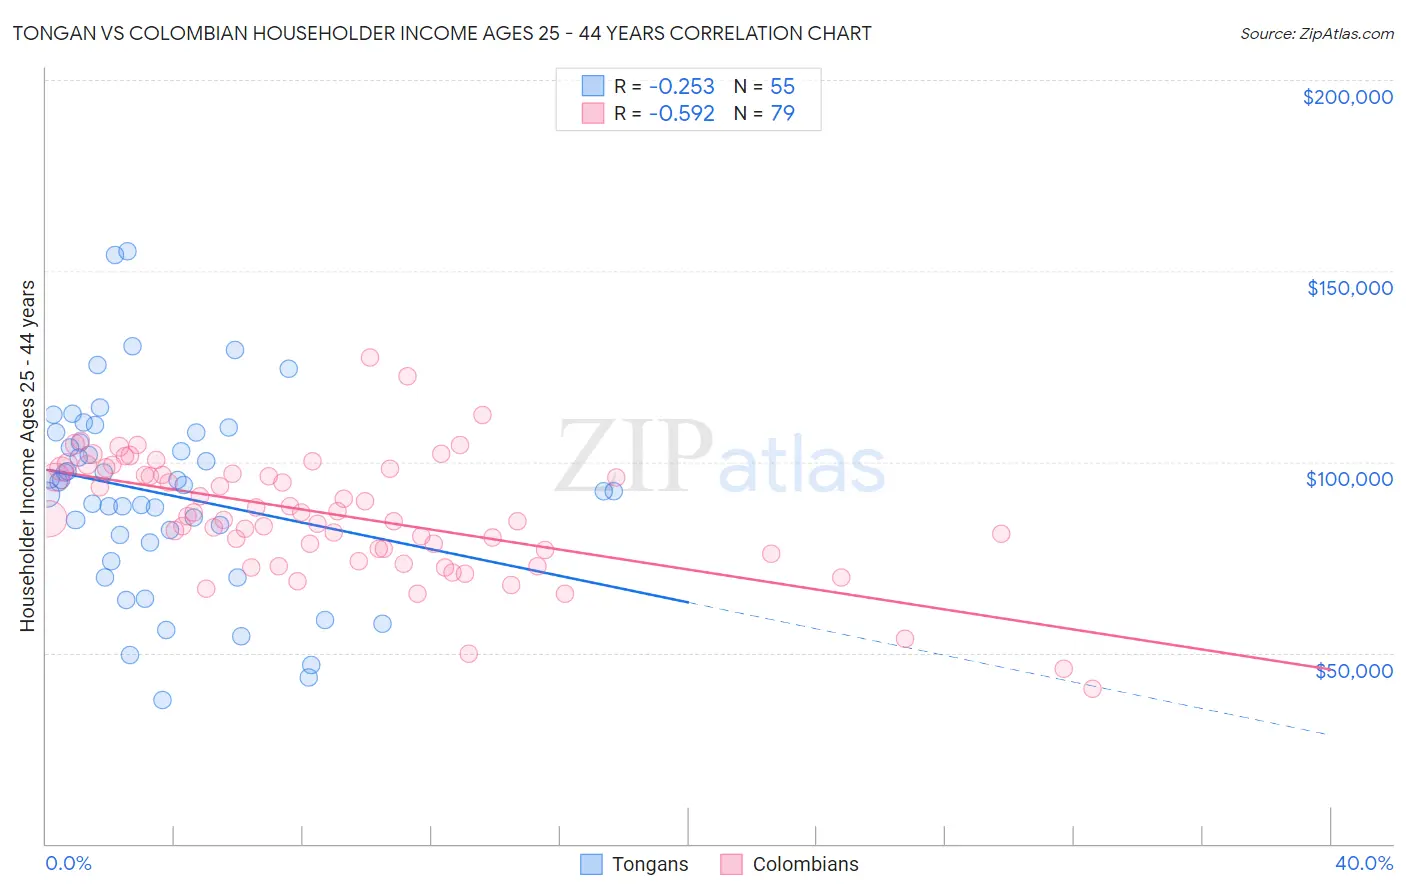 Tongan vs Colombian Householder Income Ages 25 - 44 years